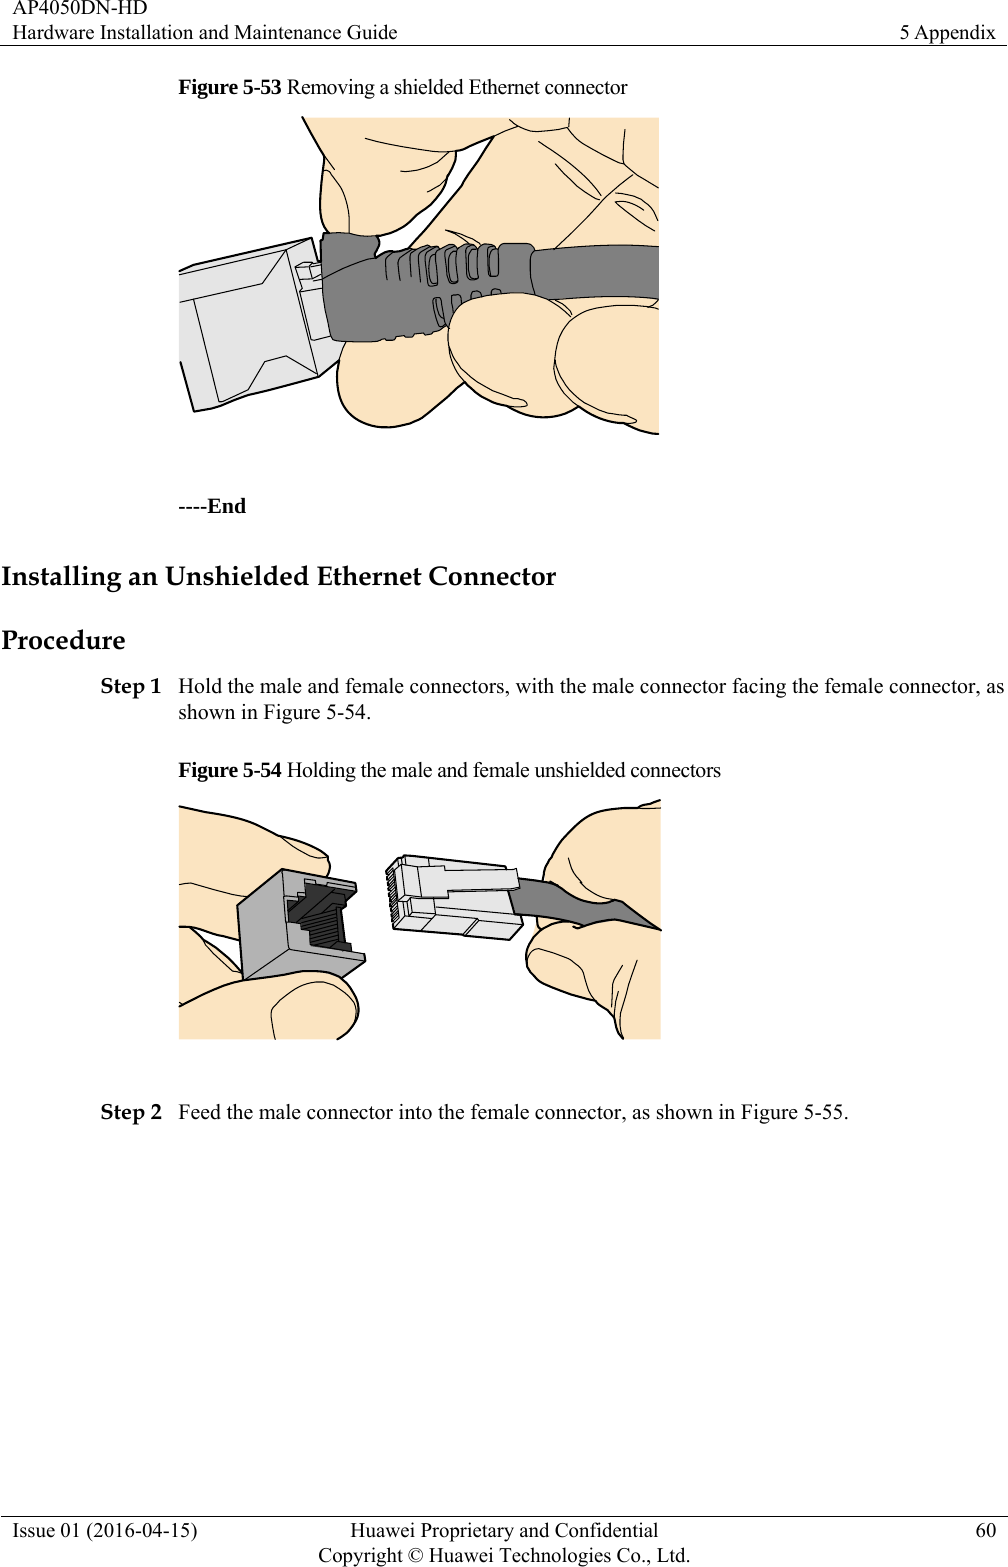 AP4050DN-HD Hardware Installation and Maintenance Guide  5 Appendix Issue 01 (2016-04-15)  Huawei Proprietary and Confidential         Copyright © Huawei Technologies Co., Ltd.60 Figure 5-53 Removing a shielded Ethernet connector   ----End Installing an Unshielded Ethernet Connector Procedure Step 1 Hold the male and female connectors, with the male connector facing the female connector, as shown in Figure 5-54. Figure 5-54 Holding the male and female unshielded connectors   Step 2 Feed the male connector into the female connector, as shown in Figure 5-55. 